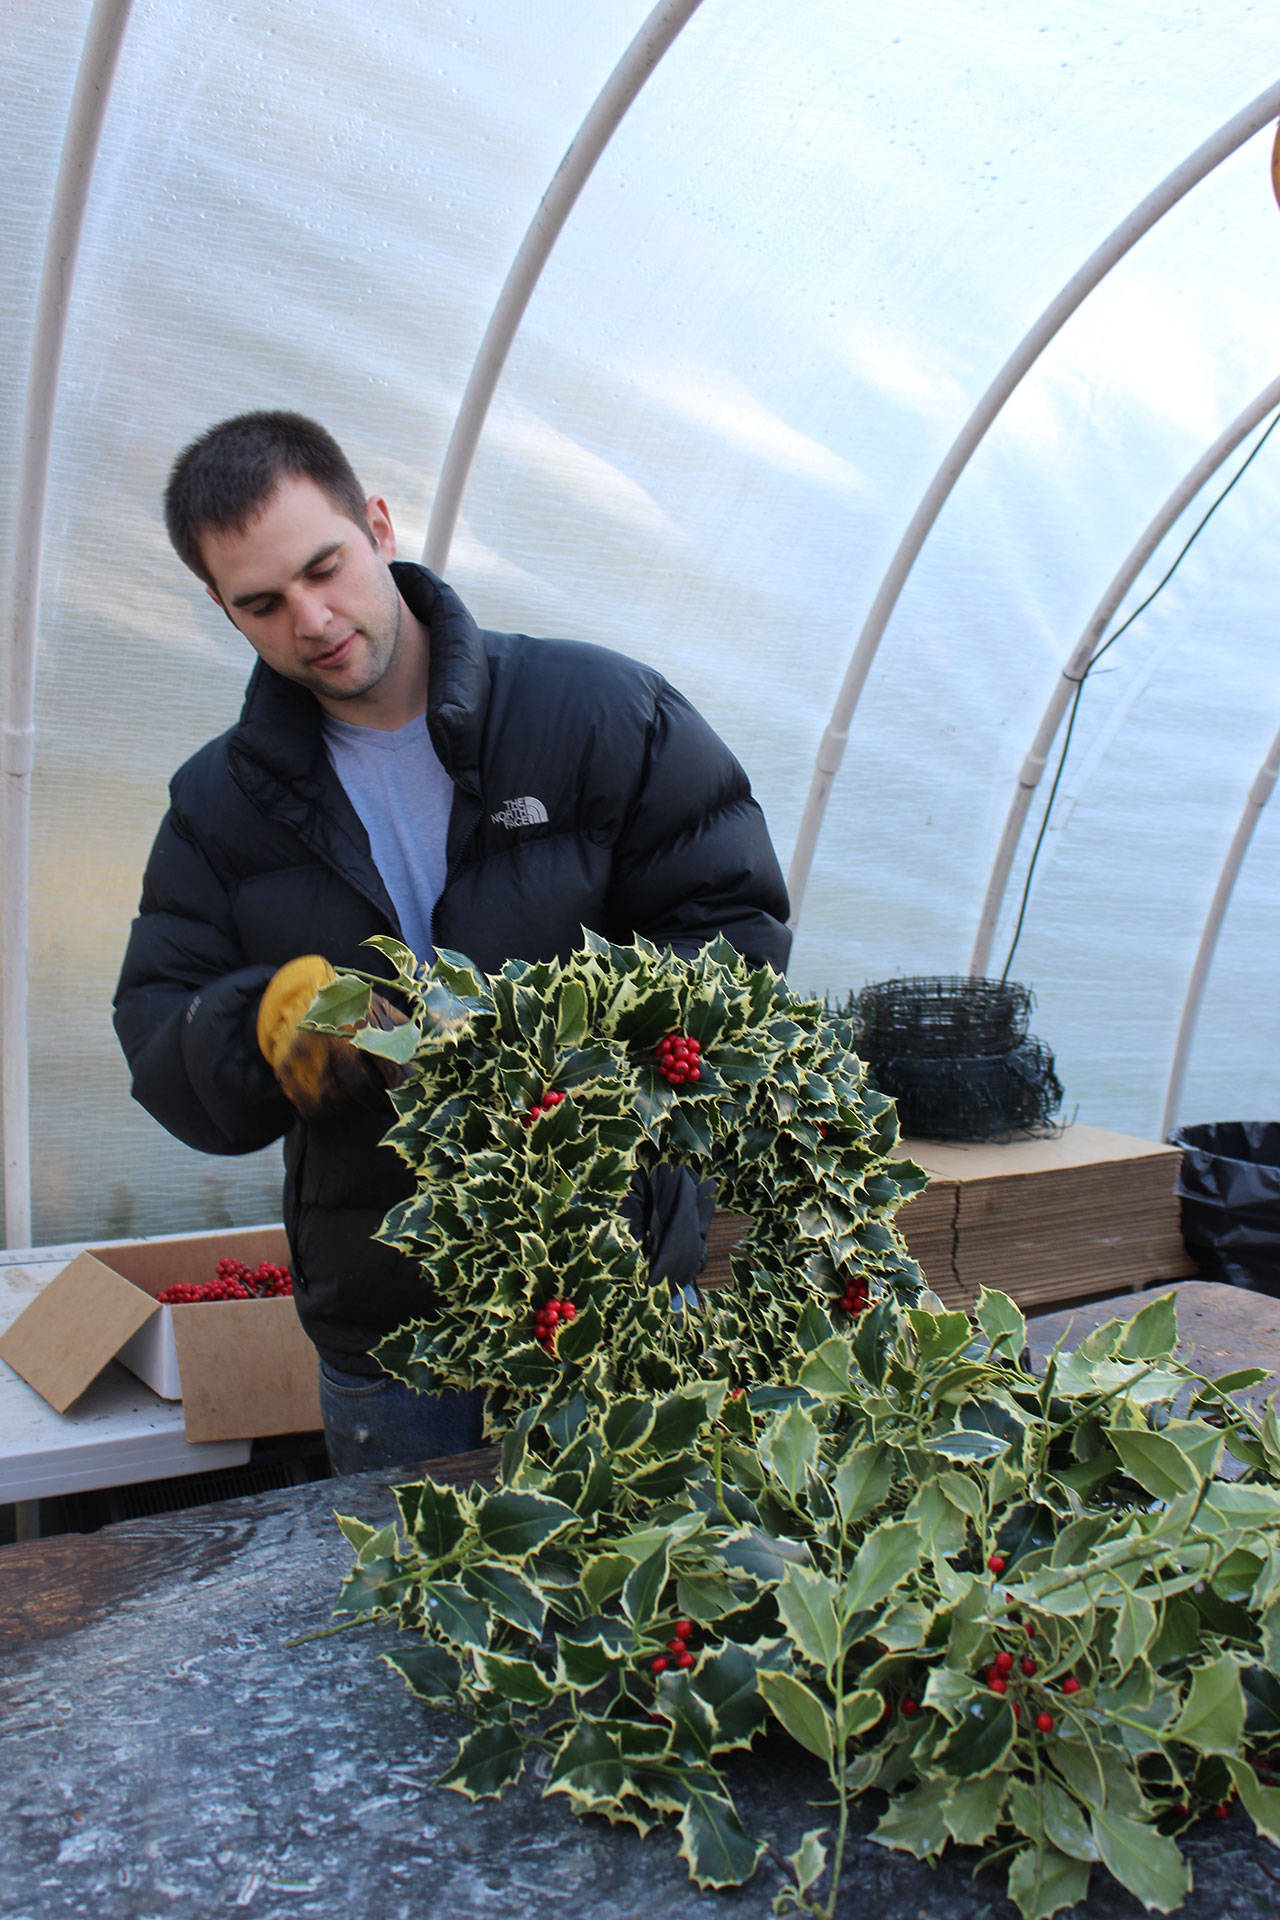 Isaiah Rawls has plenty of holly to make wreaths at Knot in Thyme north of Oak Harbor. His family operates a holly farm, gift store and Christmas tree stand six weeks a year. On weekends, it also offers free sled rides (without needing snow) on a wagon pulled by two draft horses. Photo by Patricia Guthrie/Whidbey News-Times